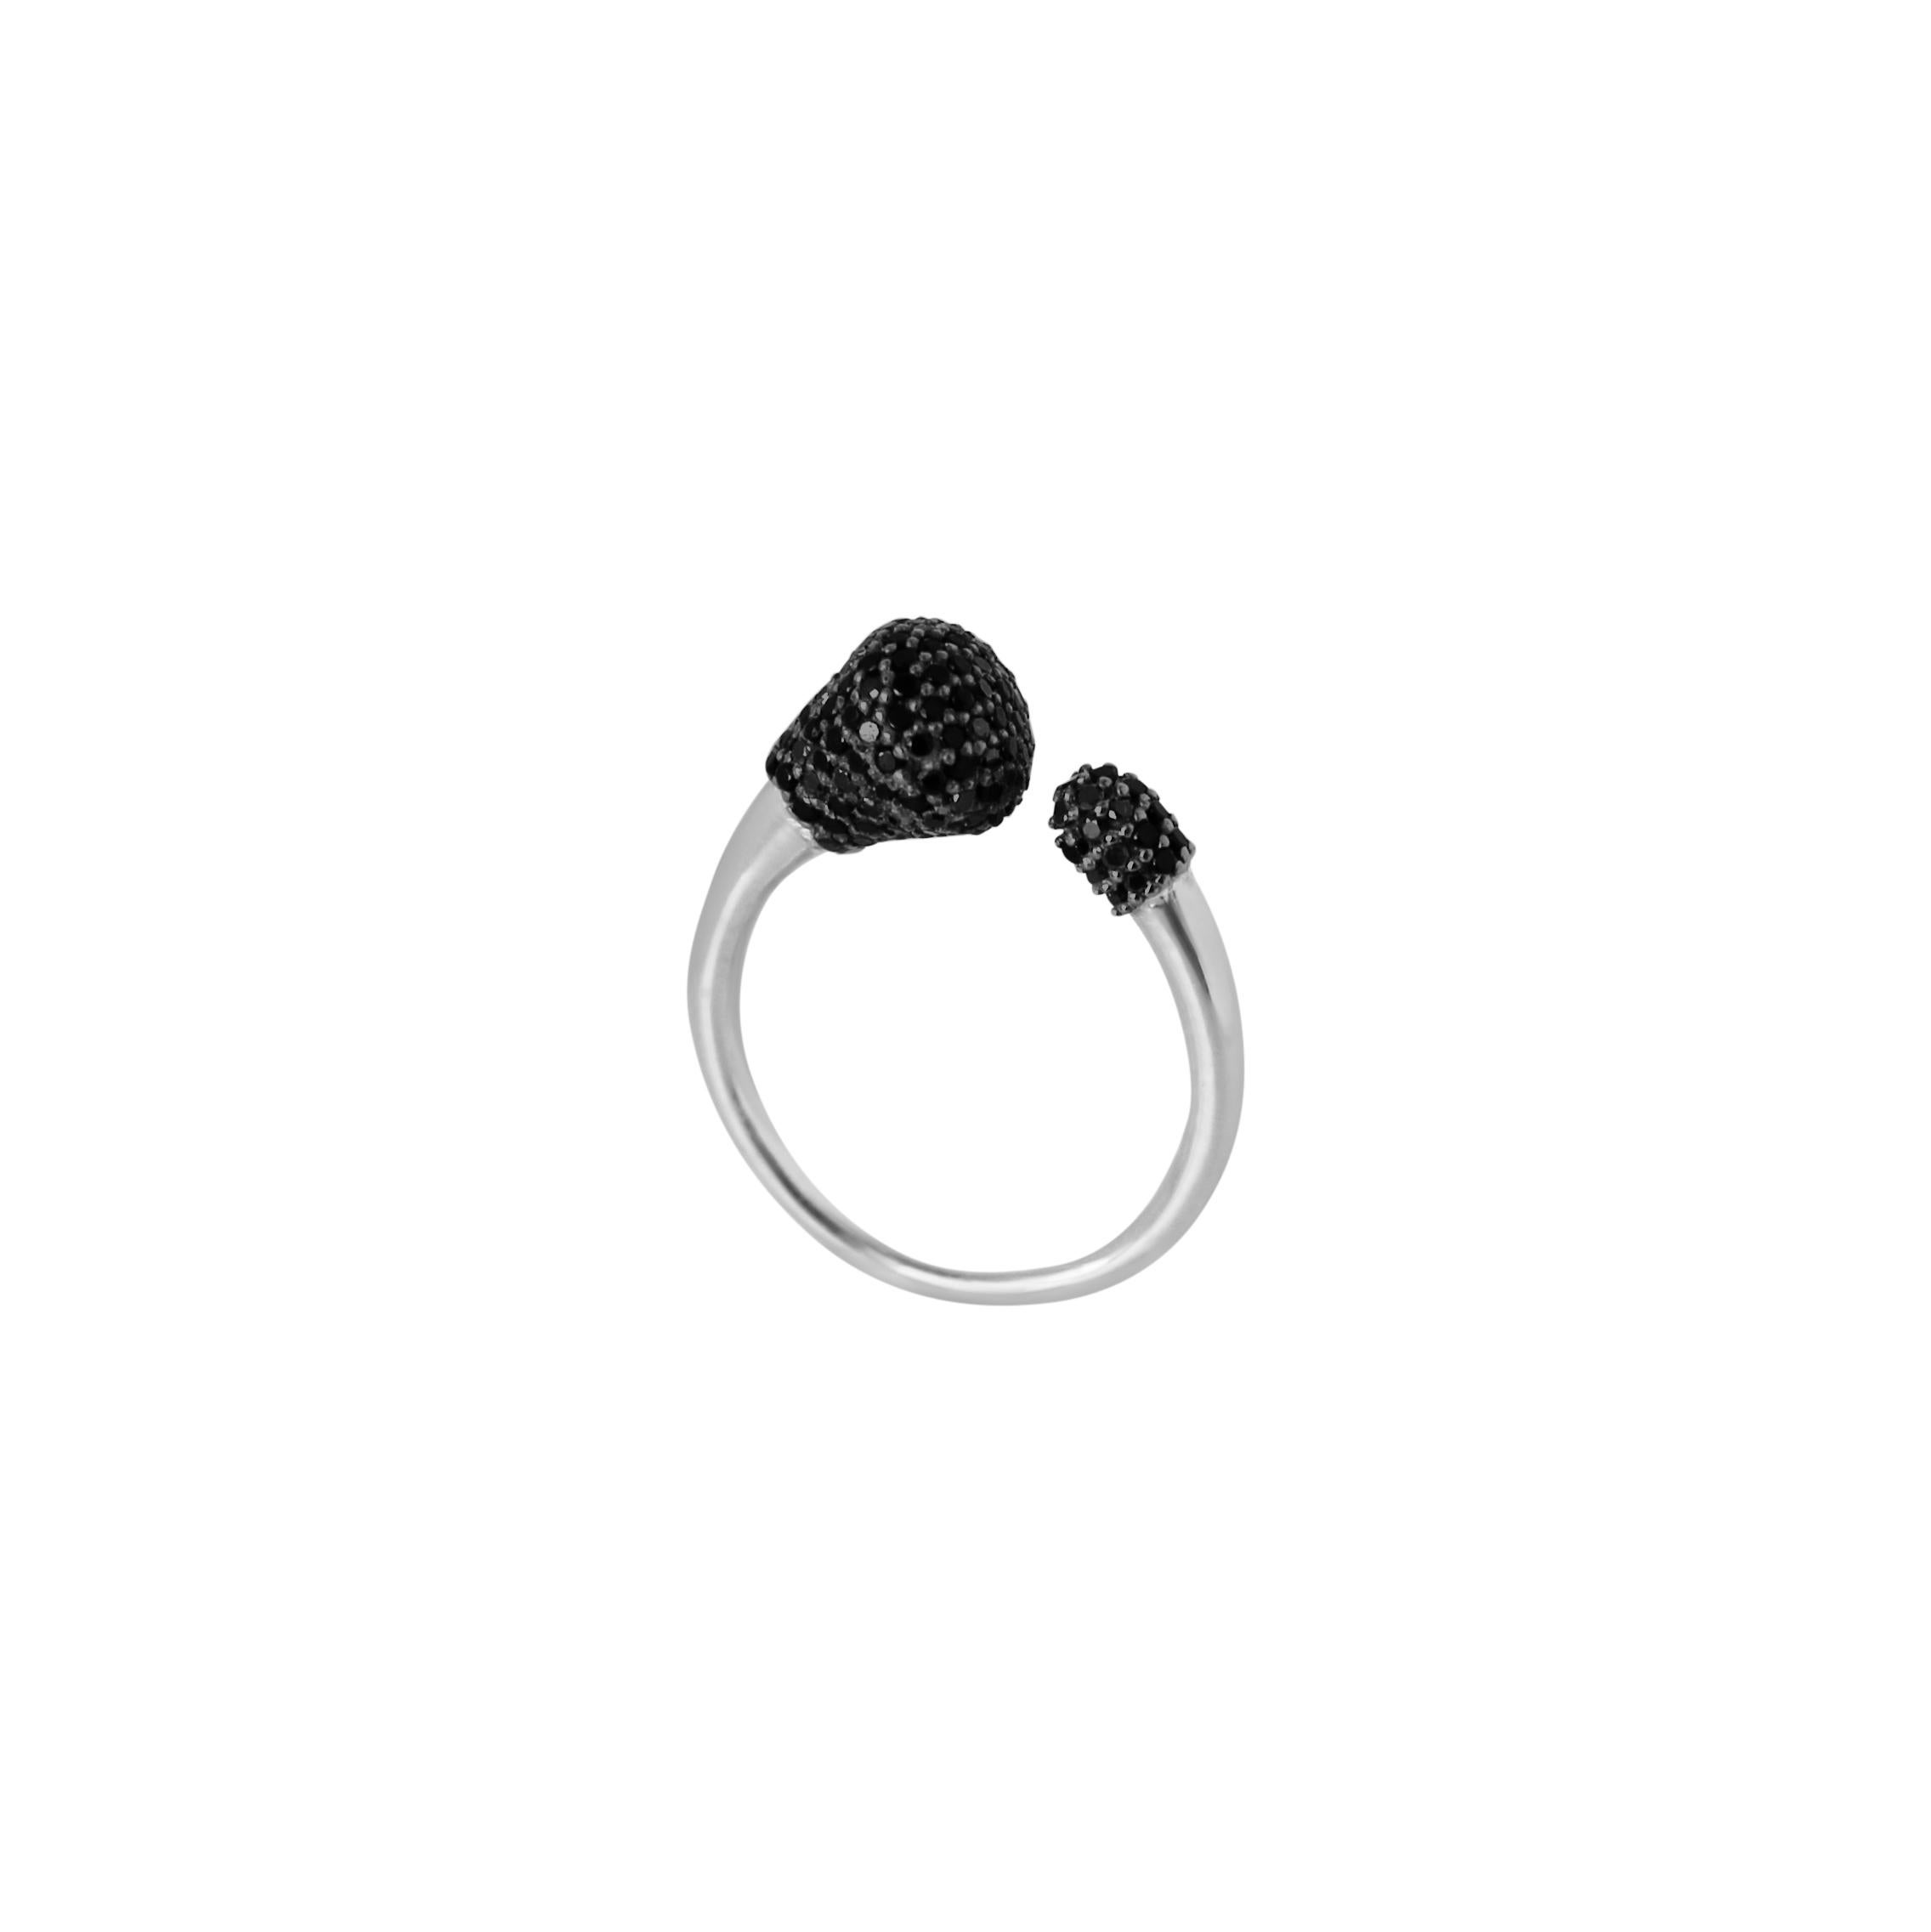 The open ring design is playful yet elegant, defined by the boldness of sterling silver and by the sophistication of sparkling handset black diamonds. Perfect worn solo or stacked with multiple rings from the same collection. 
Metal: sterling